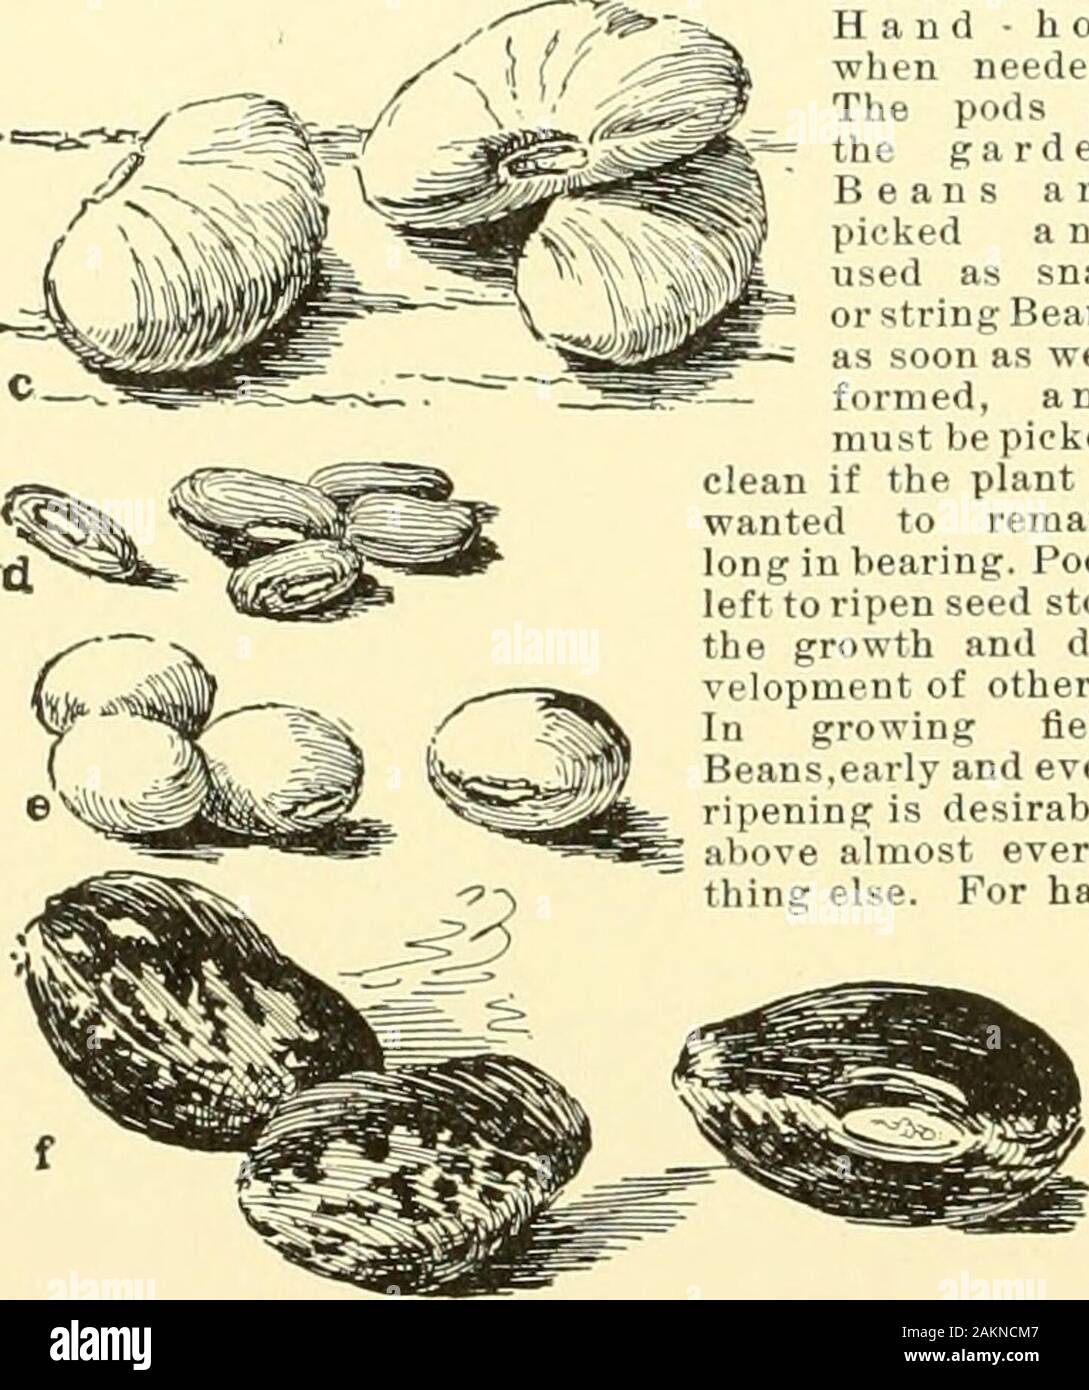 Cyclopedia of American horticulture, comprising suggestions for cultivation of horticultural plants, descriptions of the species of fruits, vegetables, flowers and ornamental plants sold in the United States and Canada, together with geographical and biographical sketches, and a synopsis of the vegetable kingdom . 191. Types of Beans. Natural size,a Vicia Faba. b, Phaseolus vulgaris, c, Phaseolus lunatus.d. Dolichos sesQuipedalis. e, Glycine hispida. f, Phaseolusniultifloi-us. vesting the crop, special tools have been devised andare in use by those who make a business of Bean-grow-ing ; but wh Stock Photo